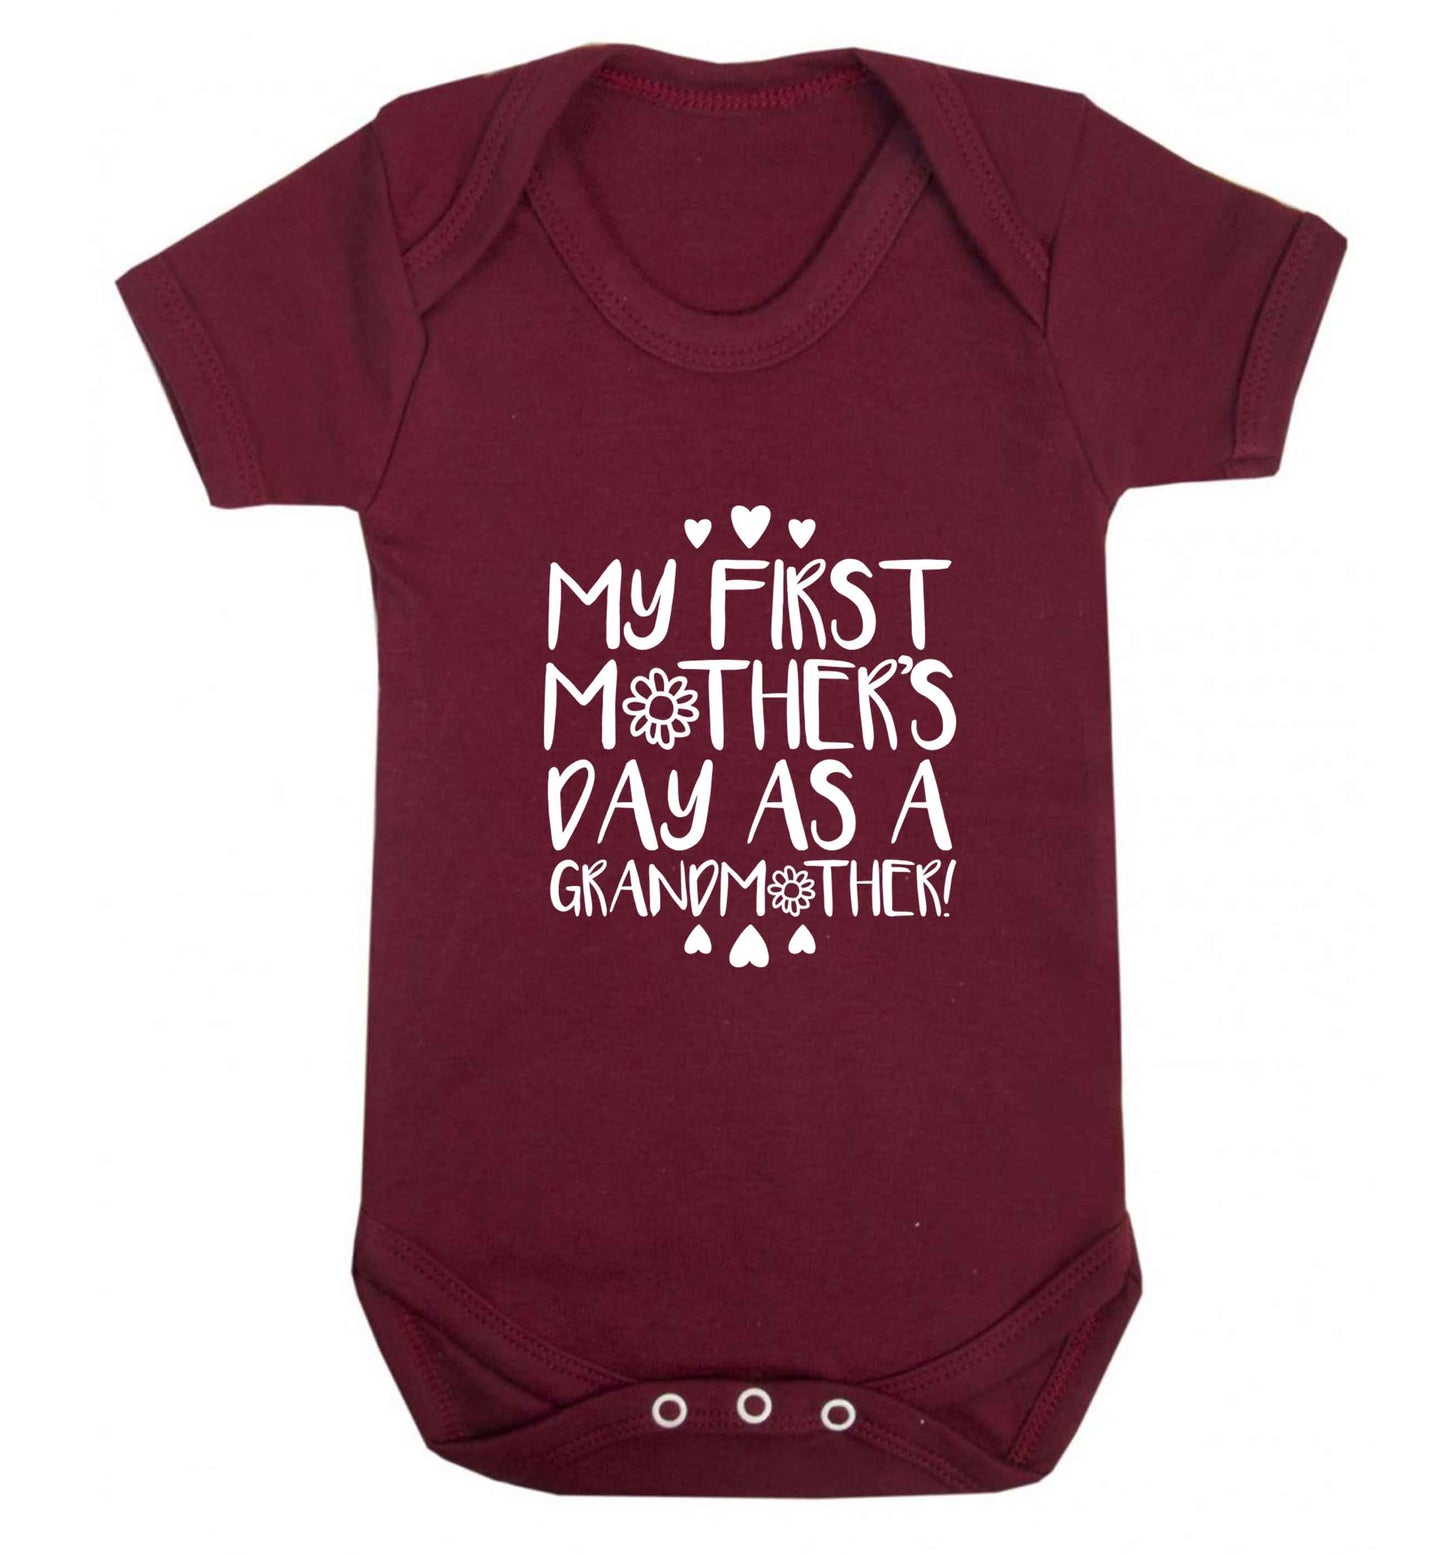 It's my first mother's day as a grandmother baby vest maroon 18-24 months